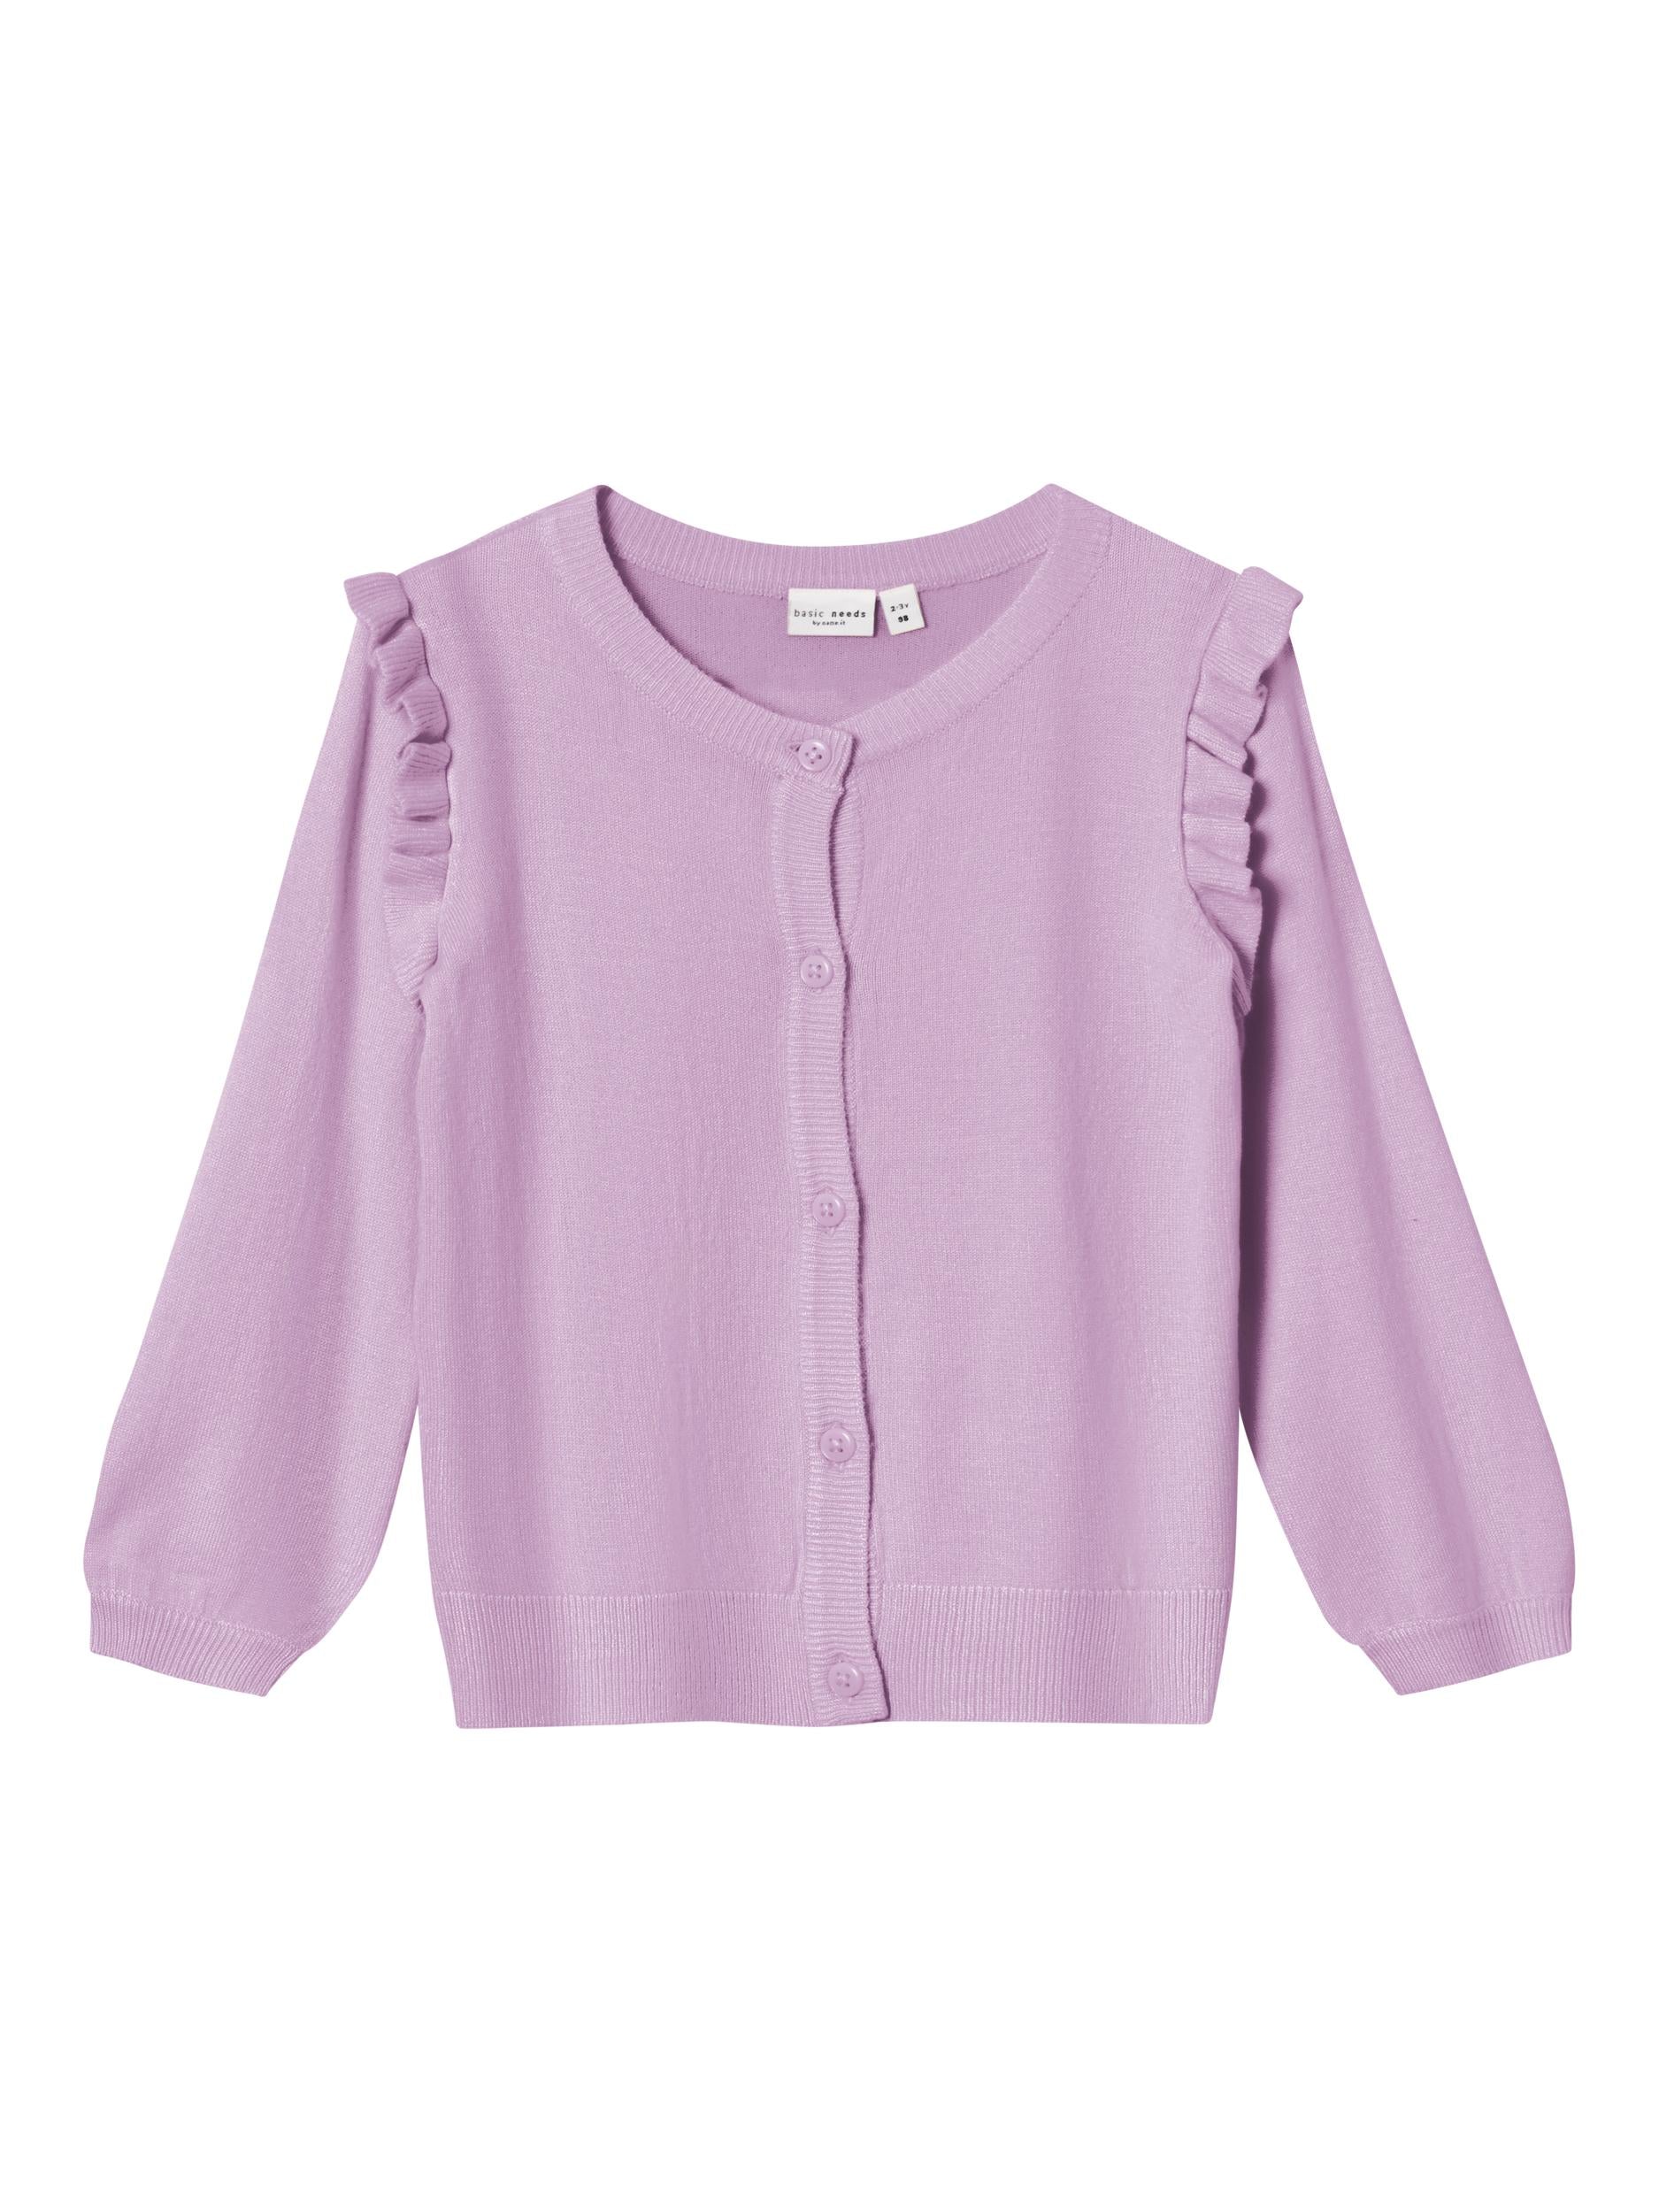 Girl's Orchid Bloom Vininna Mini Girl Long Sleeve Knit Cardigan-Front View